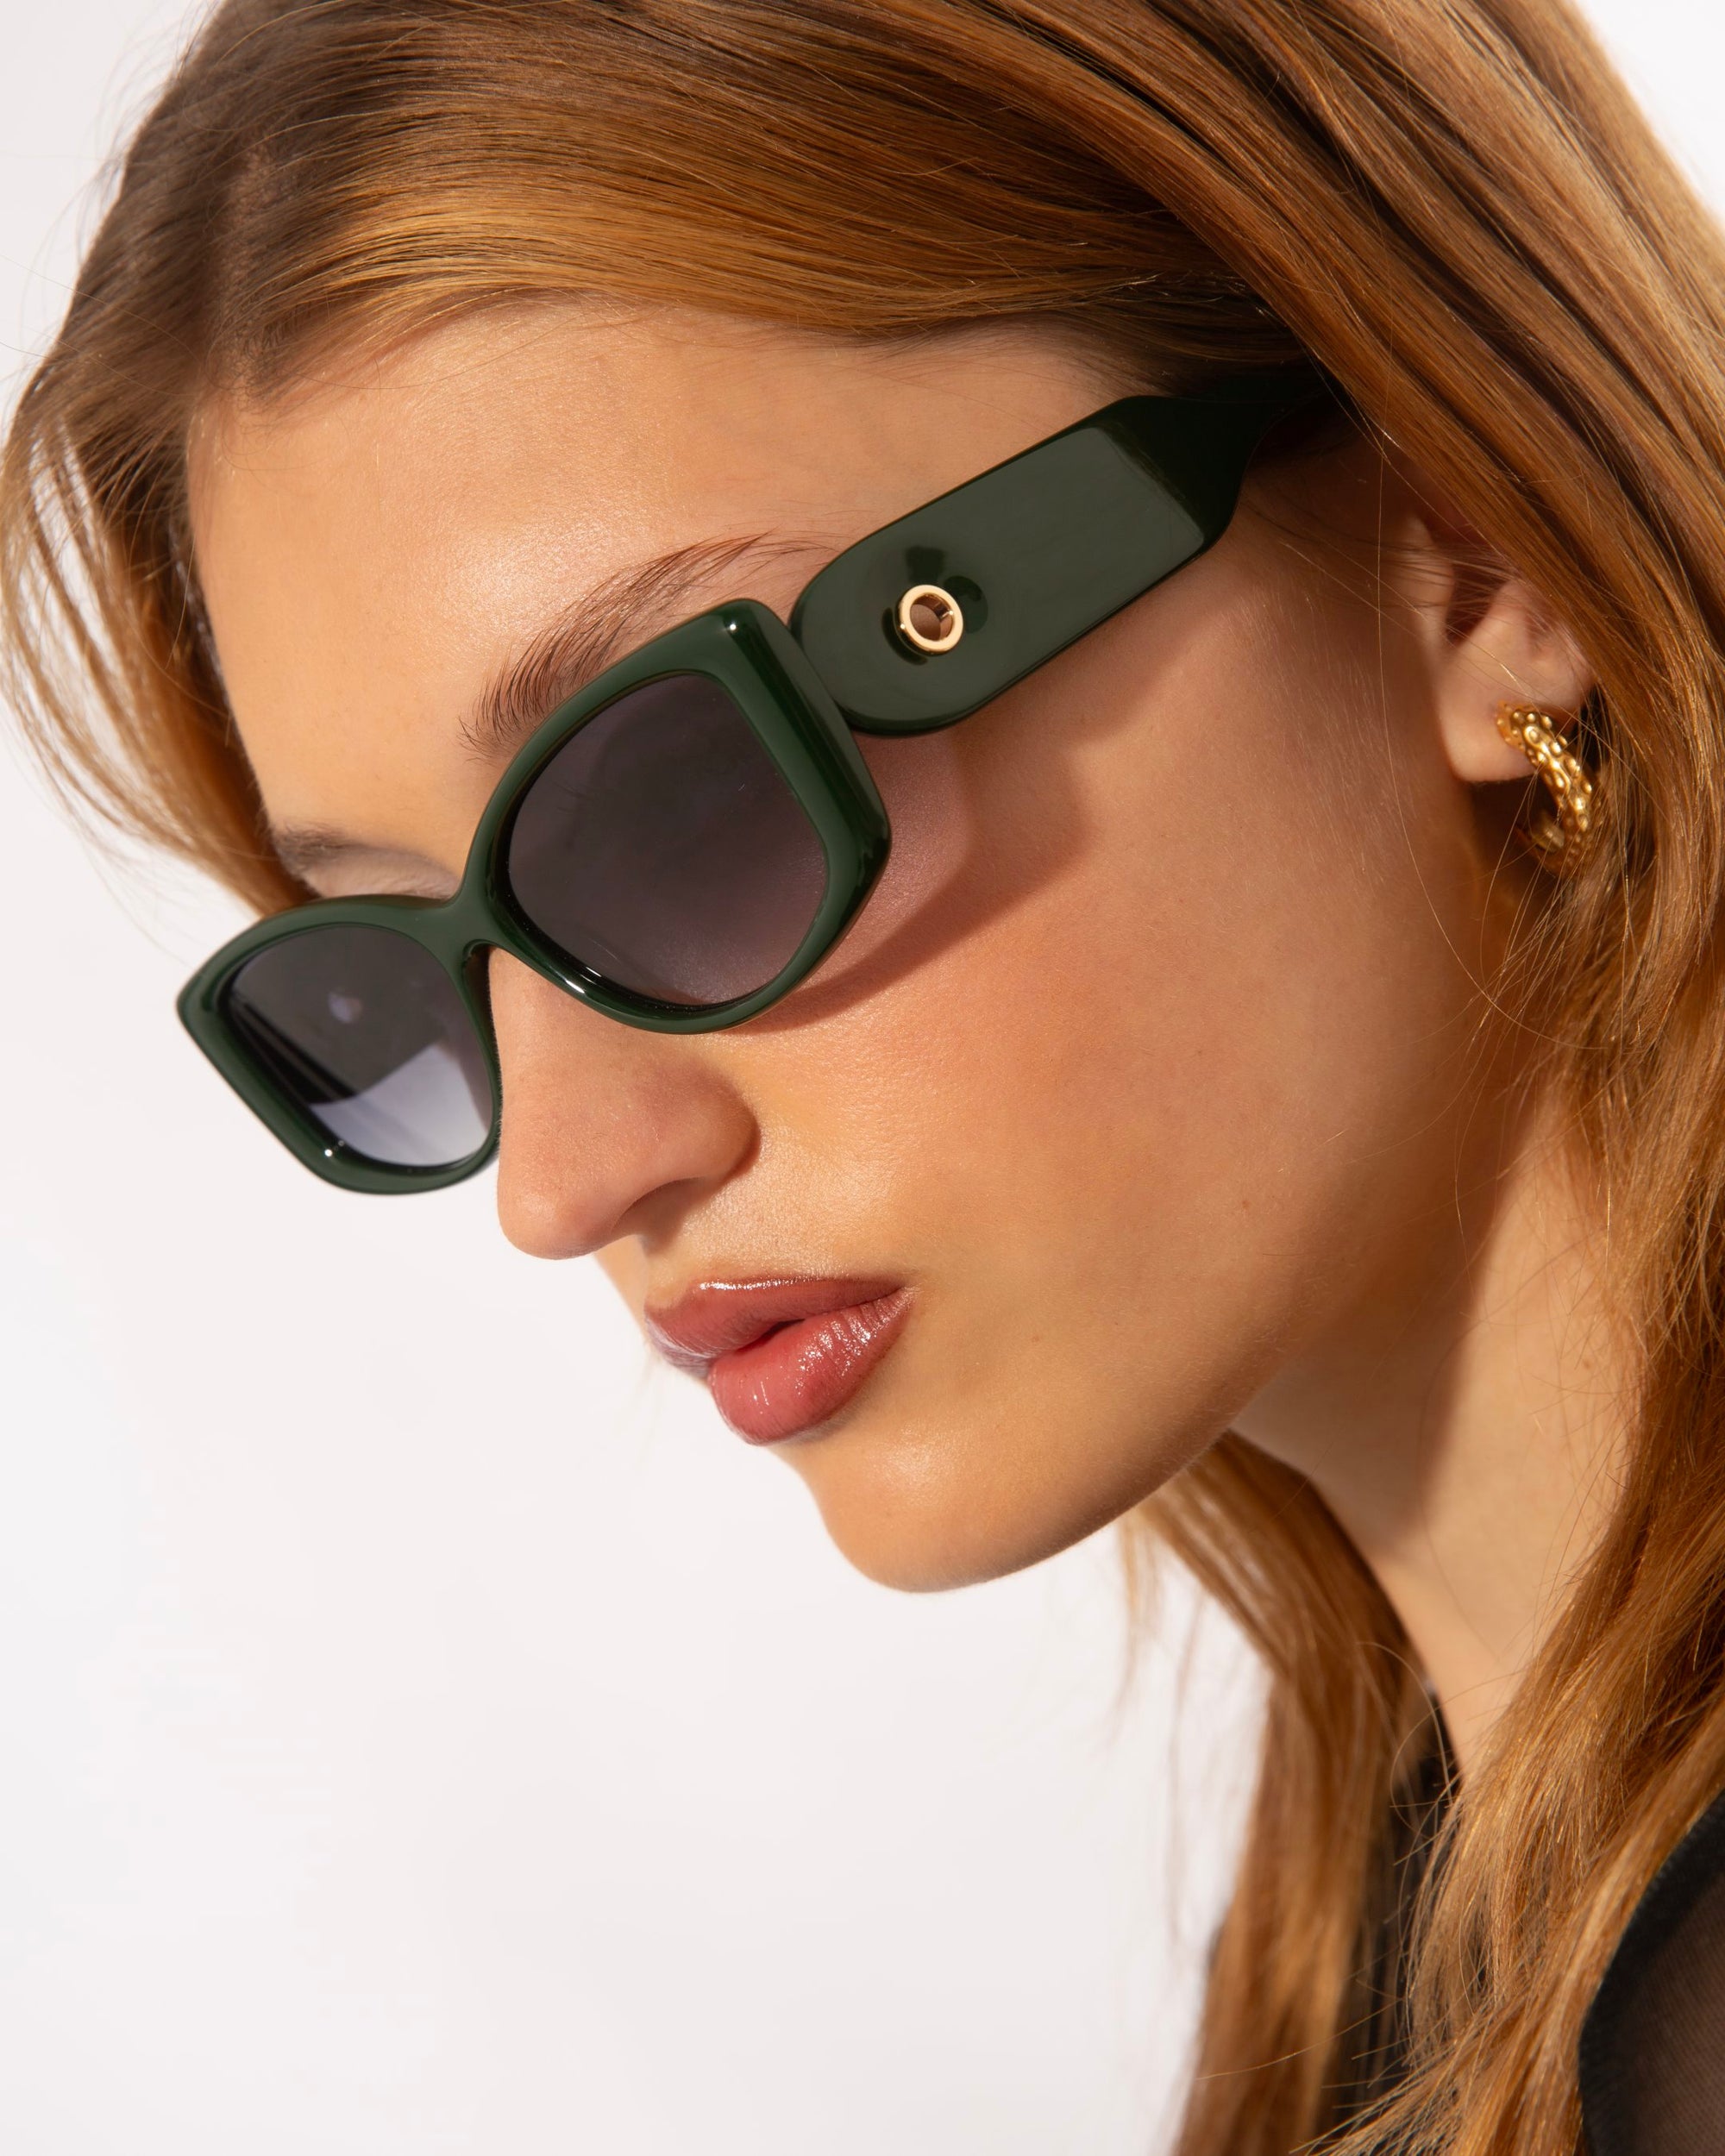 A person with long, auburn hair is wearing dark green, rectangular Mene sunglasses by For Art&#39;s Sake® and gold hoop earrings. The background is a plain white, and the person is looking slightly downwards, showcasing the side profile of their face.